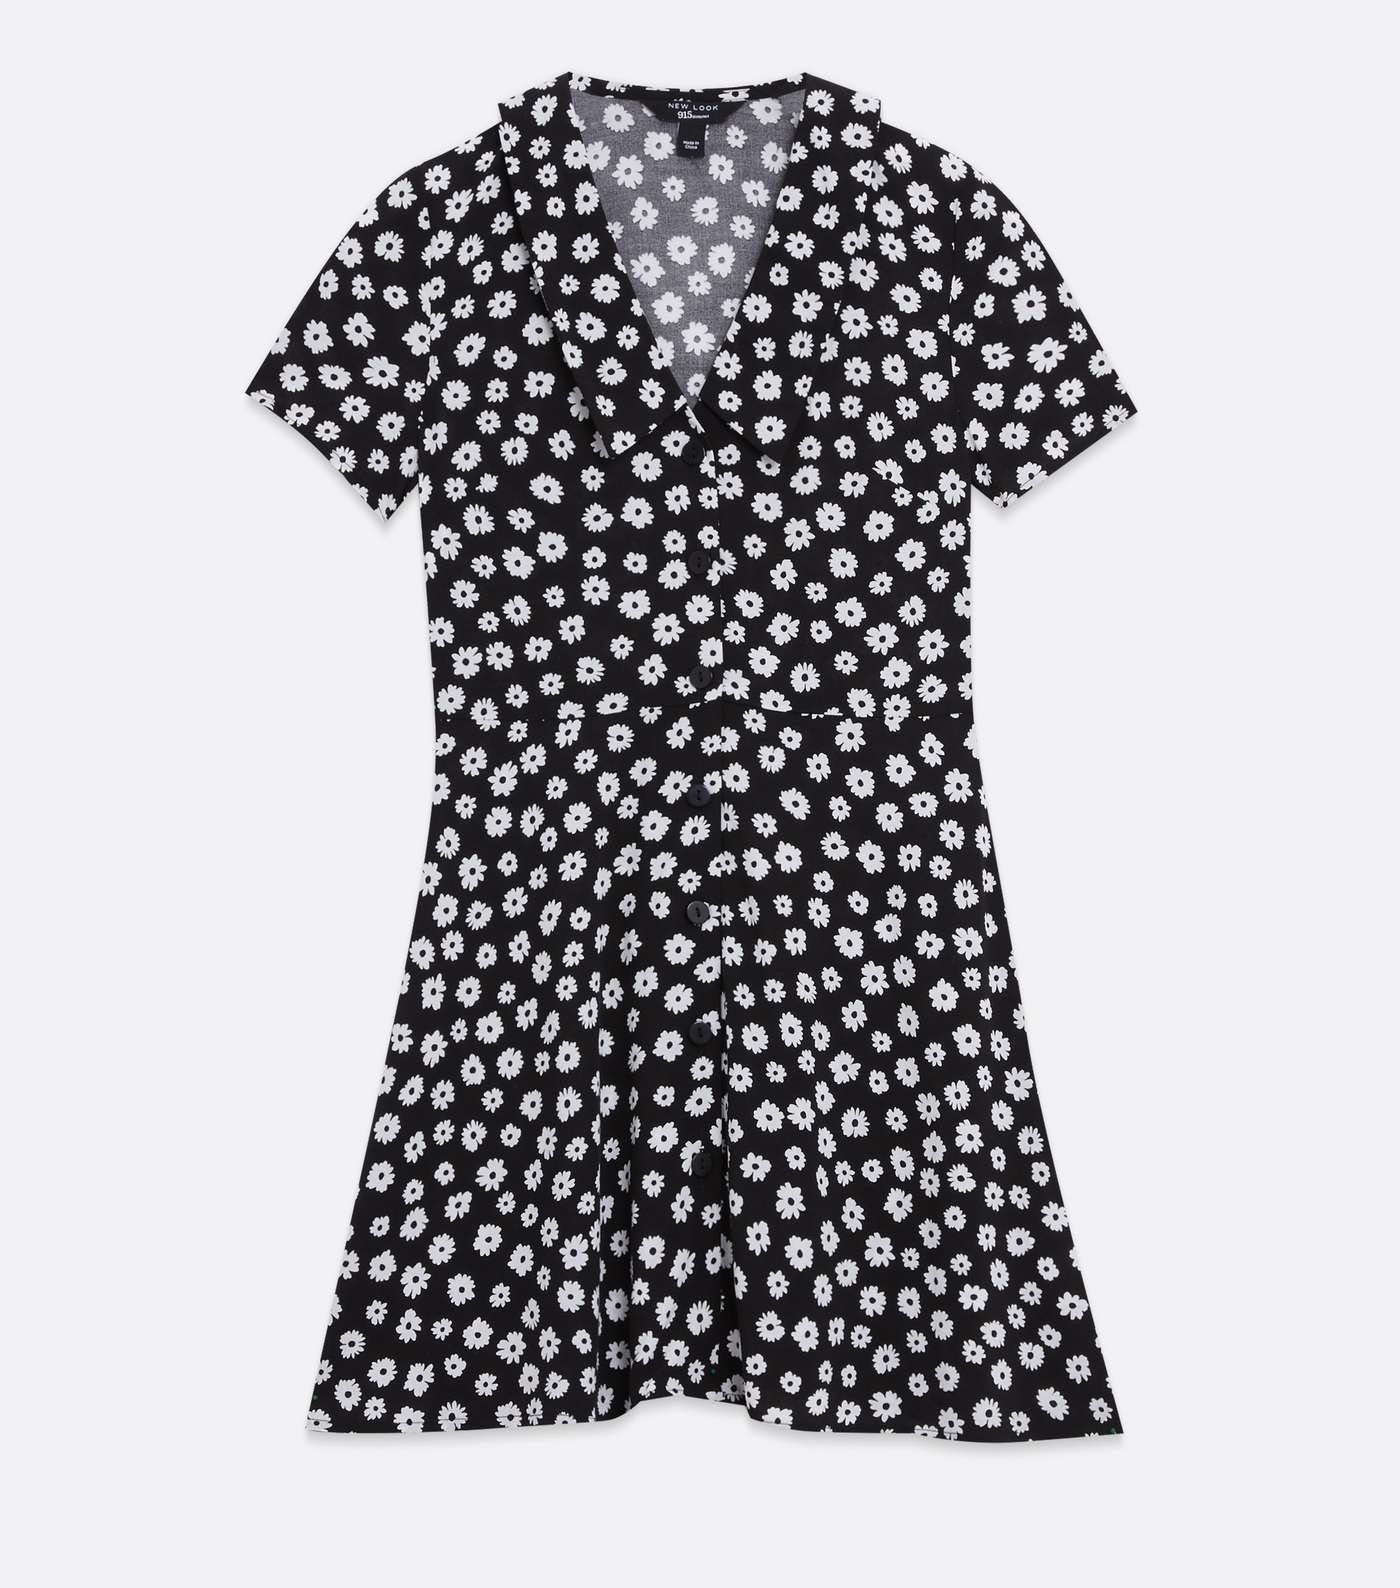 Girls Black Floral Collared Button Up Dress Image 5